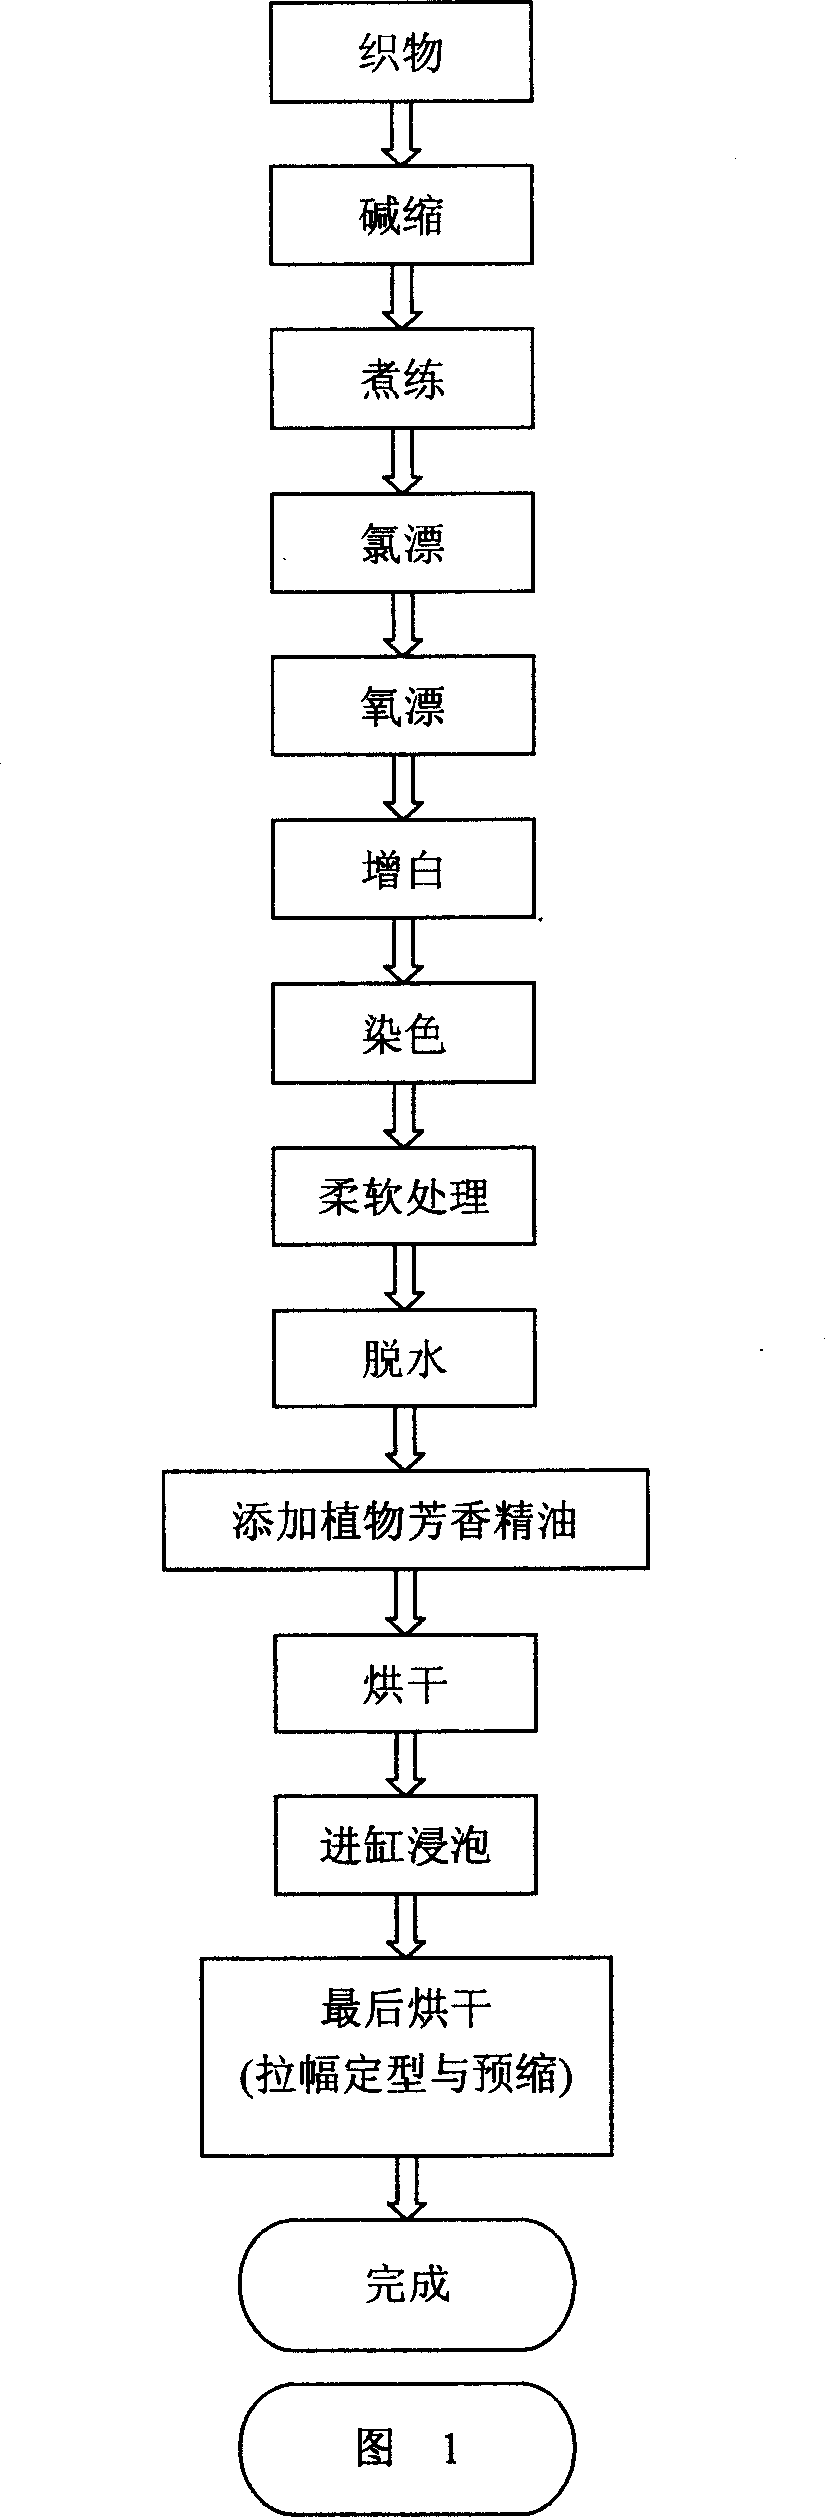 Process for producing fabric with plant flavour